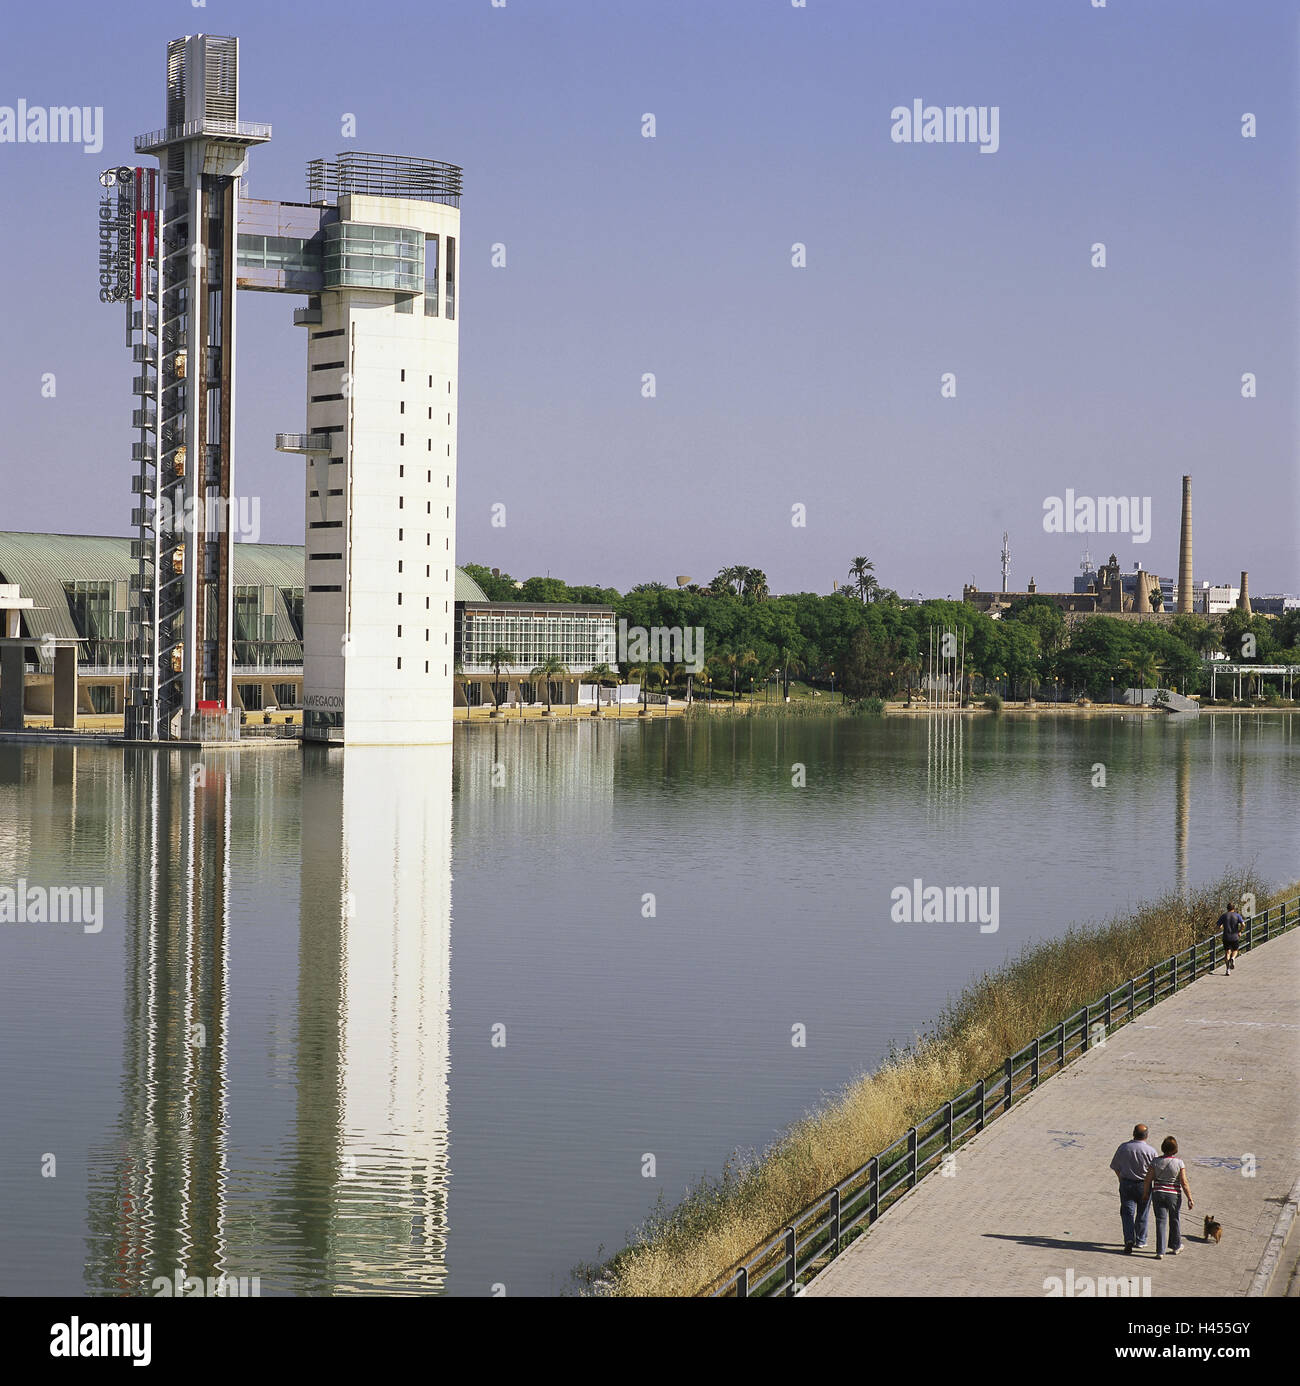 Spain, Andalusia, Seville, Parque, Tecnologico Cartuja 93, Torre Schinder, Europe, town, destination, place of interest, building, structure, architecture, tower, tower building, world exhibition, Expo, river, water, shore, person, walk, Stock Photo